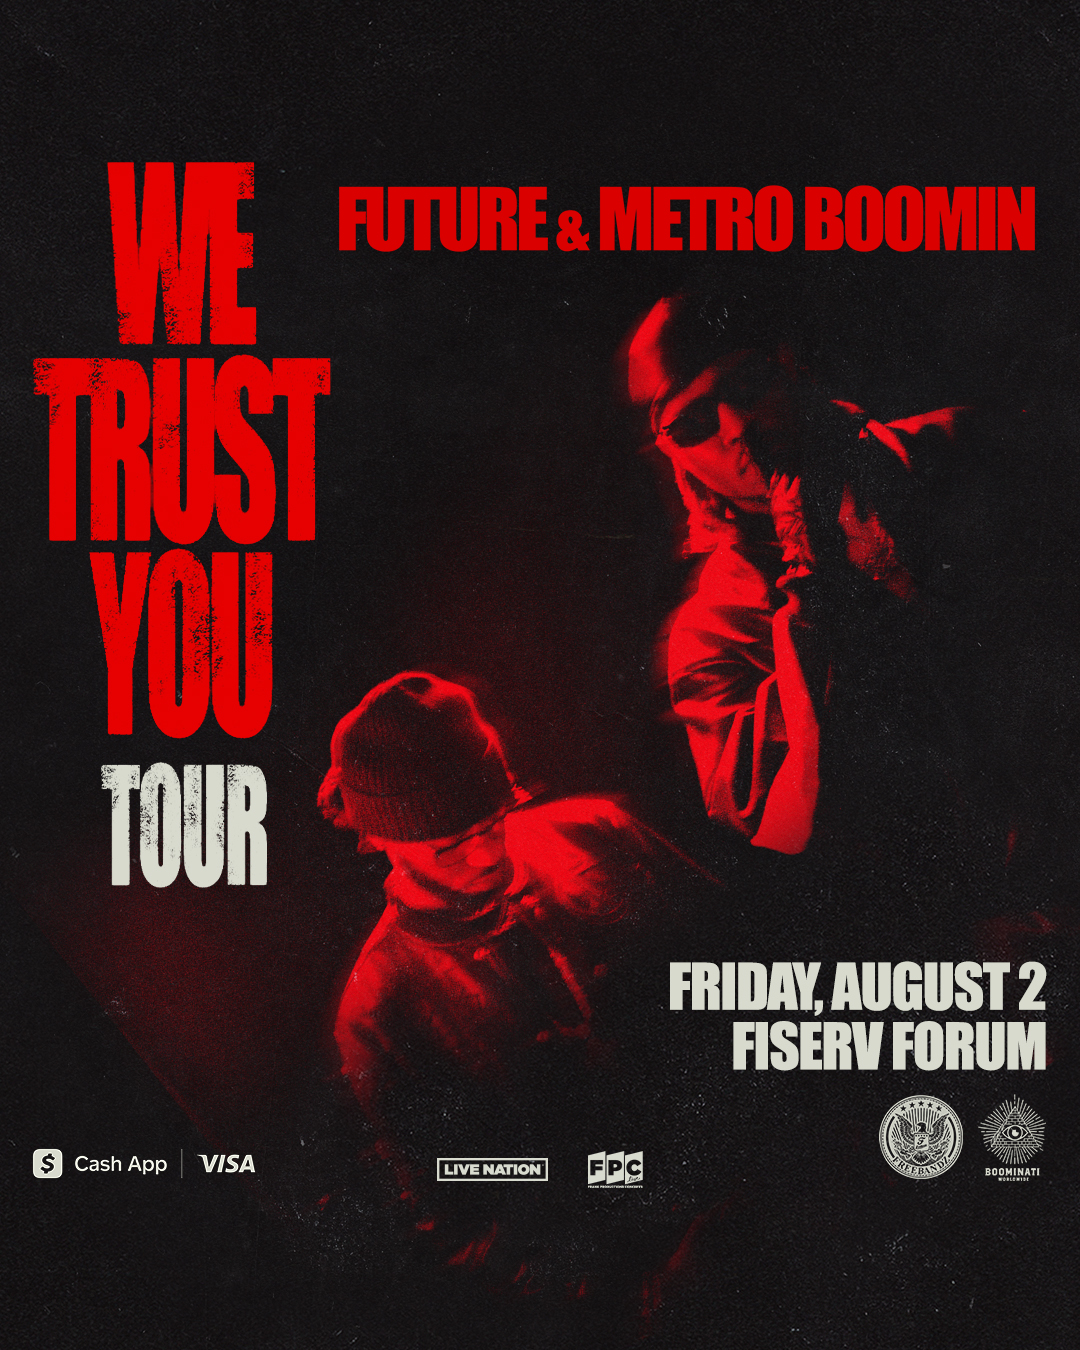 Jennifer from Union Grove won Future and Metro Boomin tickets!